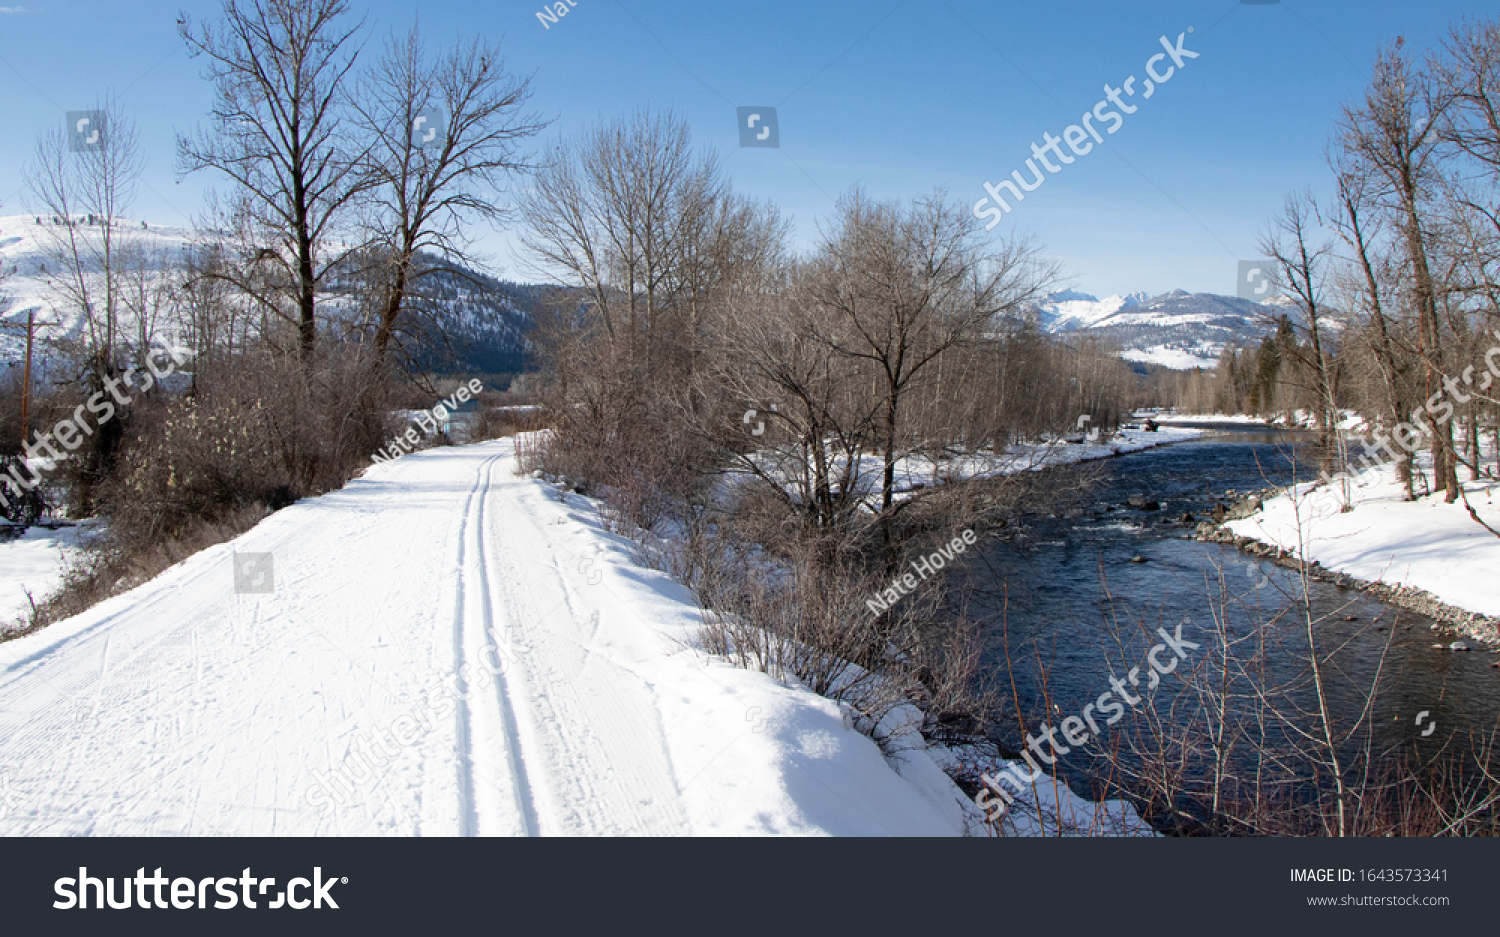 Stock Photo Wide Shot Of Ski Trail By River With The Foothills Of The North Cascades In The Distance Methow 1643573341 